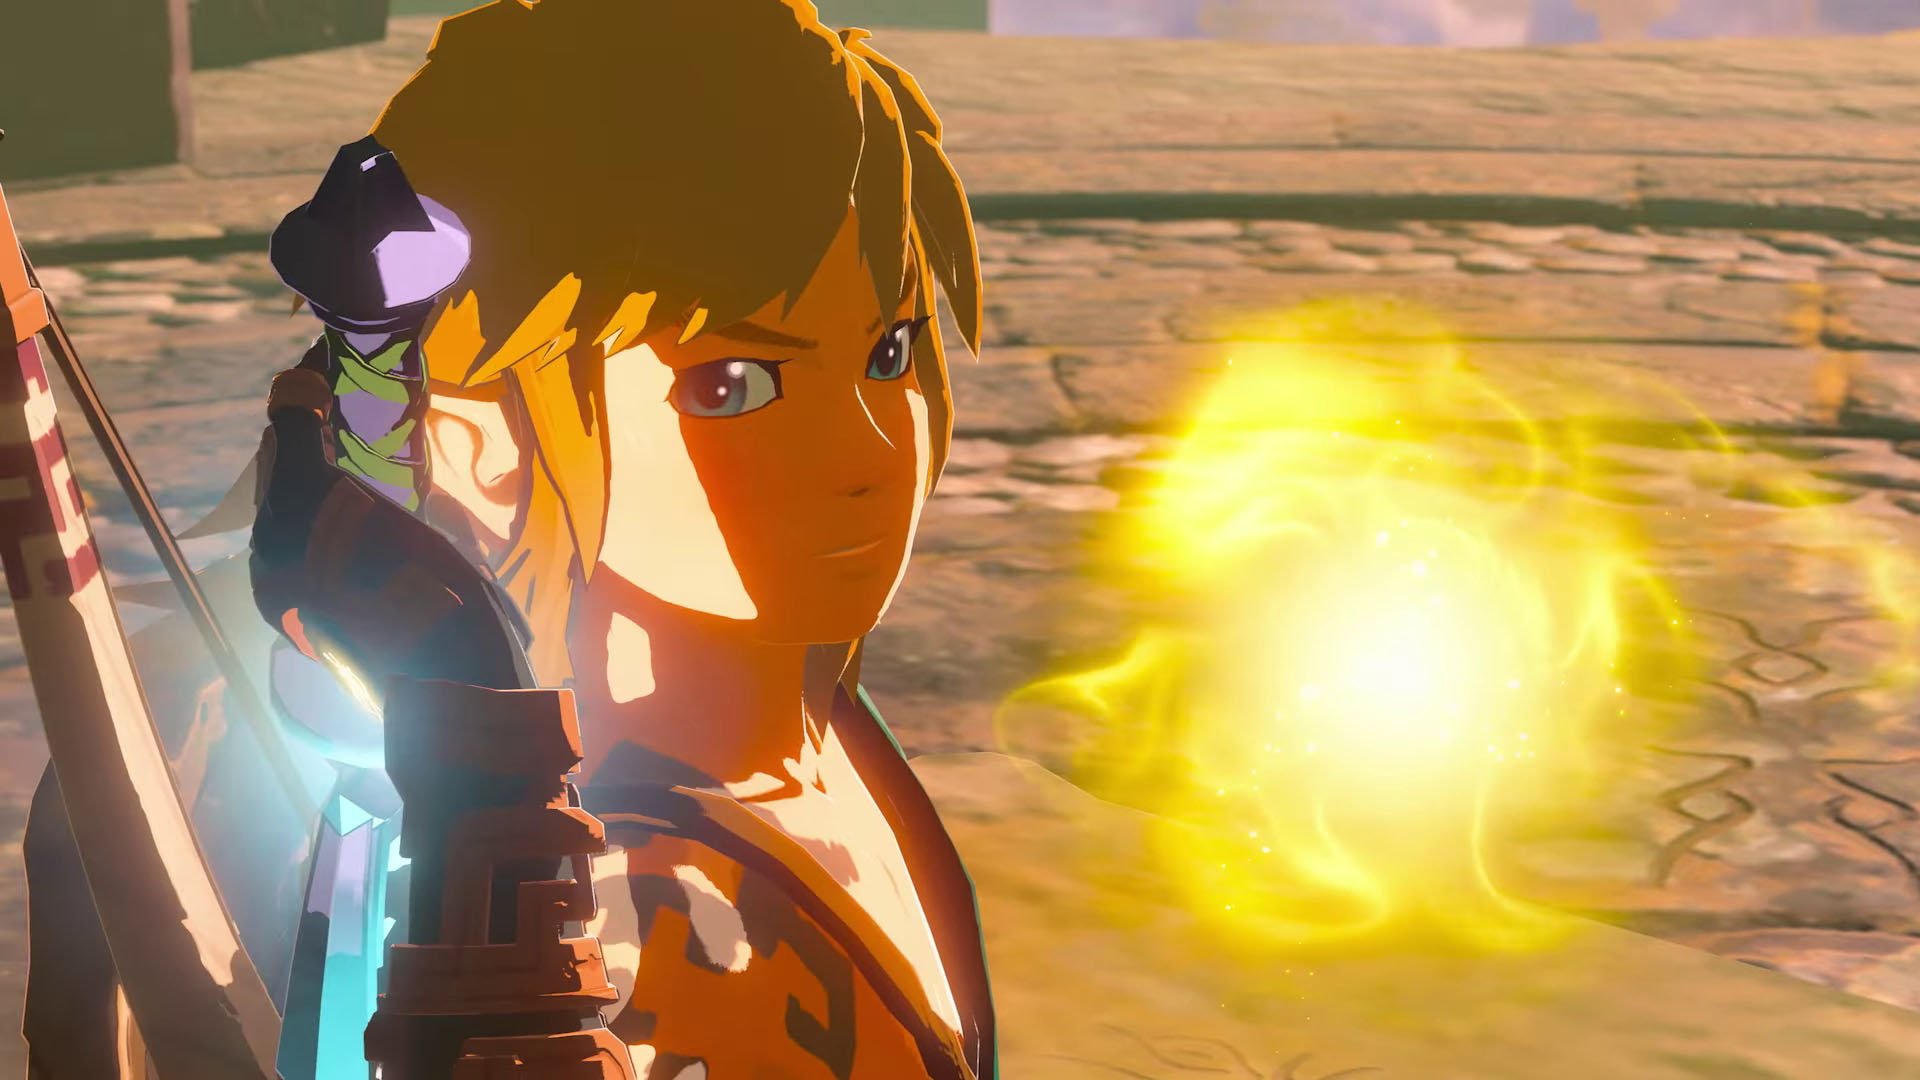 A new look at the sequel to The Legend of Zelda: Breath of the